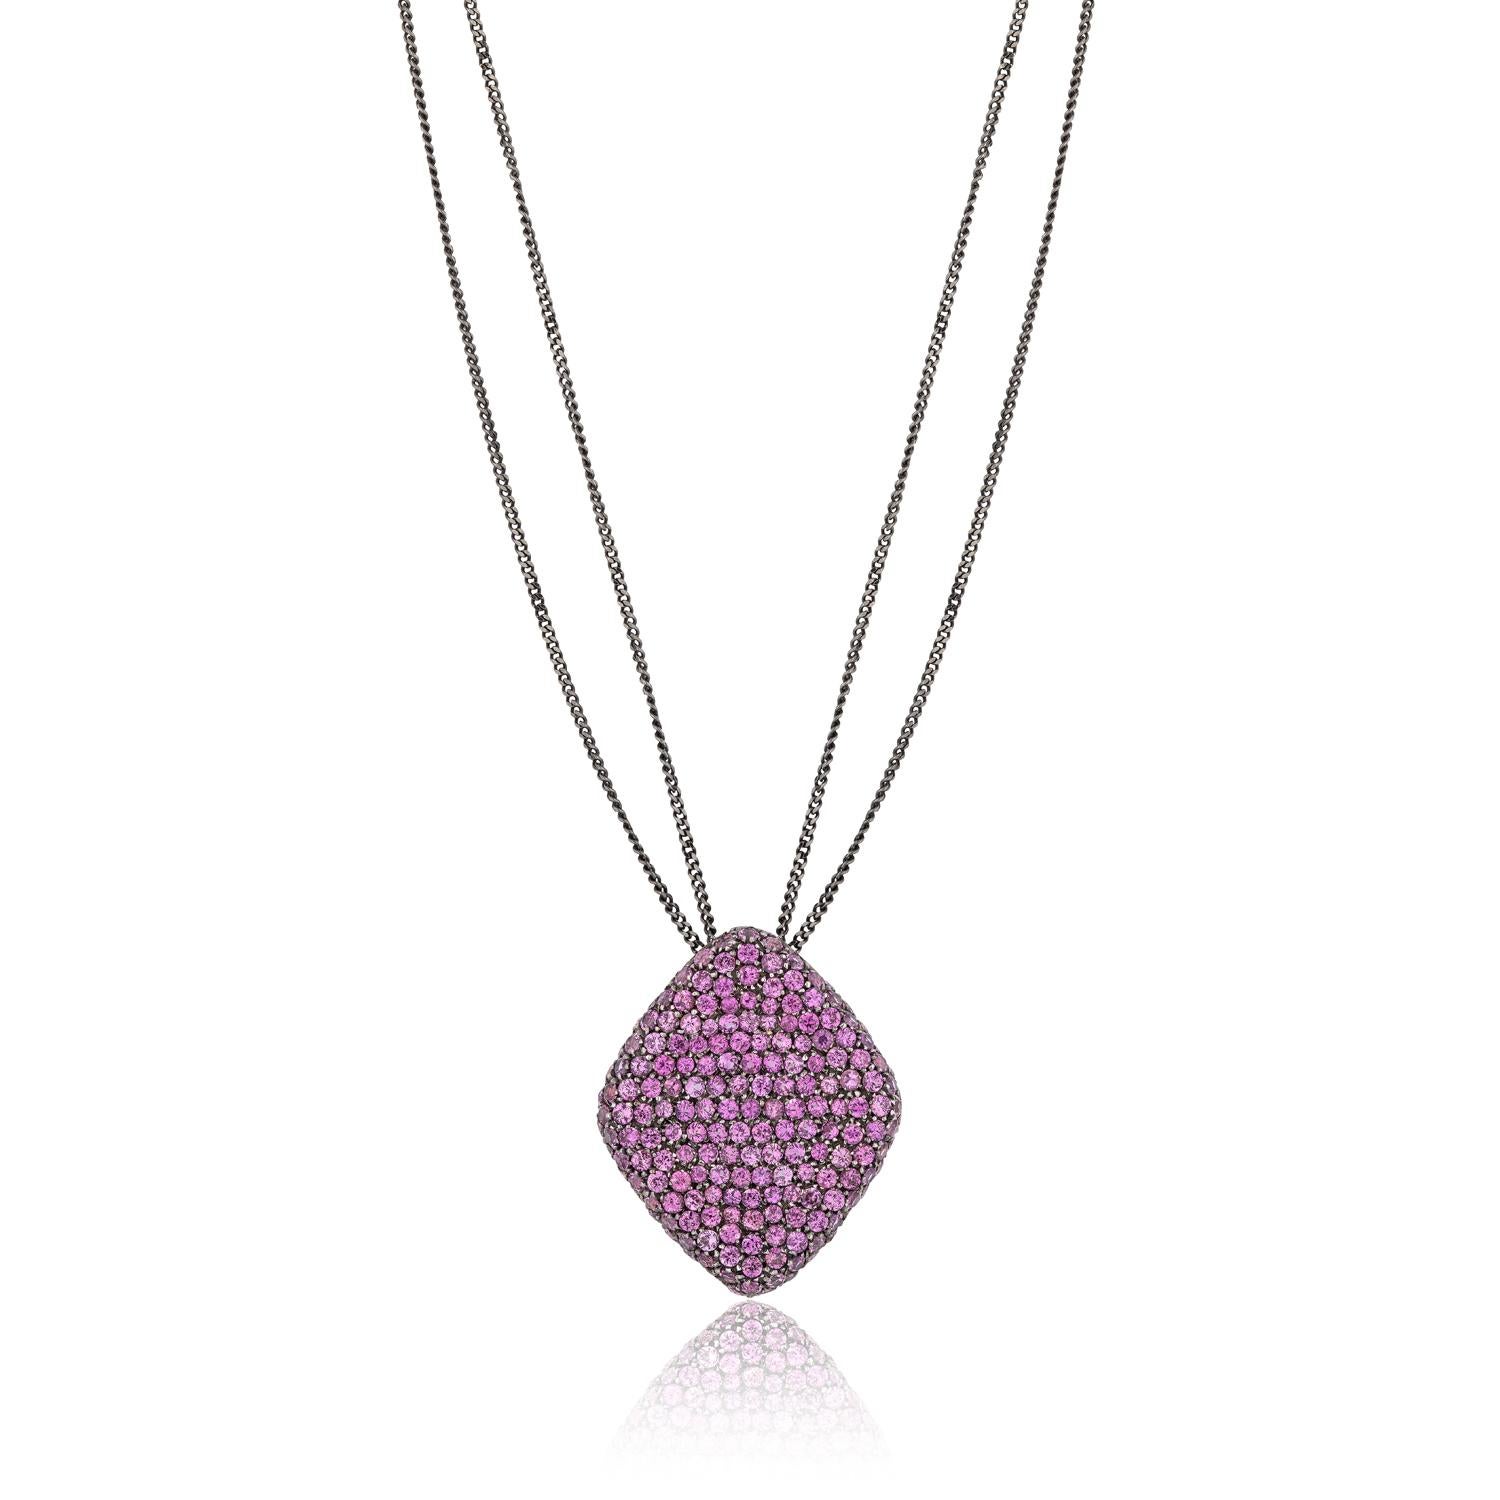 Andreoli Pink Sapphire 18 Karat Gold Pendant Necklace

This pendant features:
- 6.25 Carat Pink Sapphire
- 16.90 Gram 18K White Gold
- Made In Italy